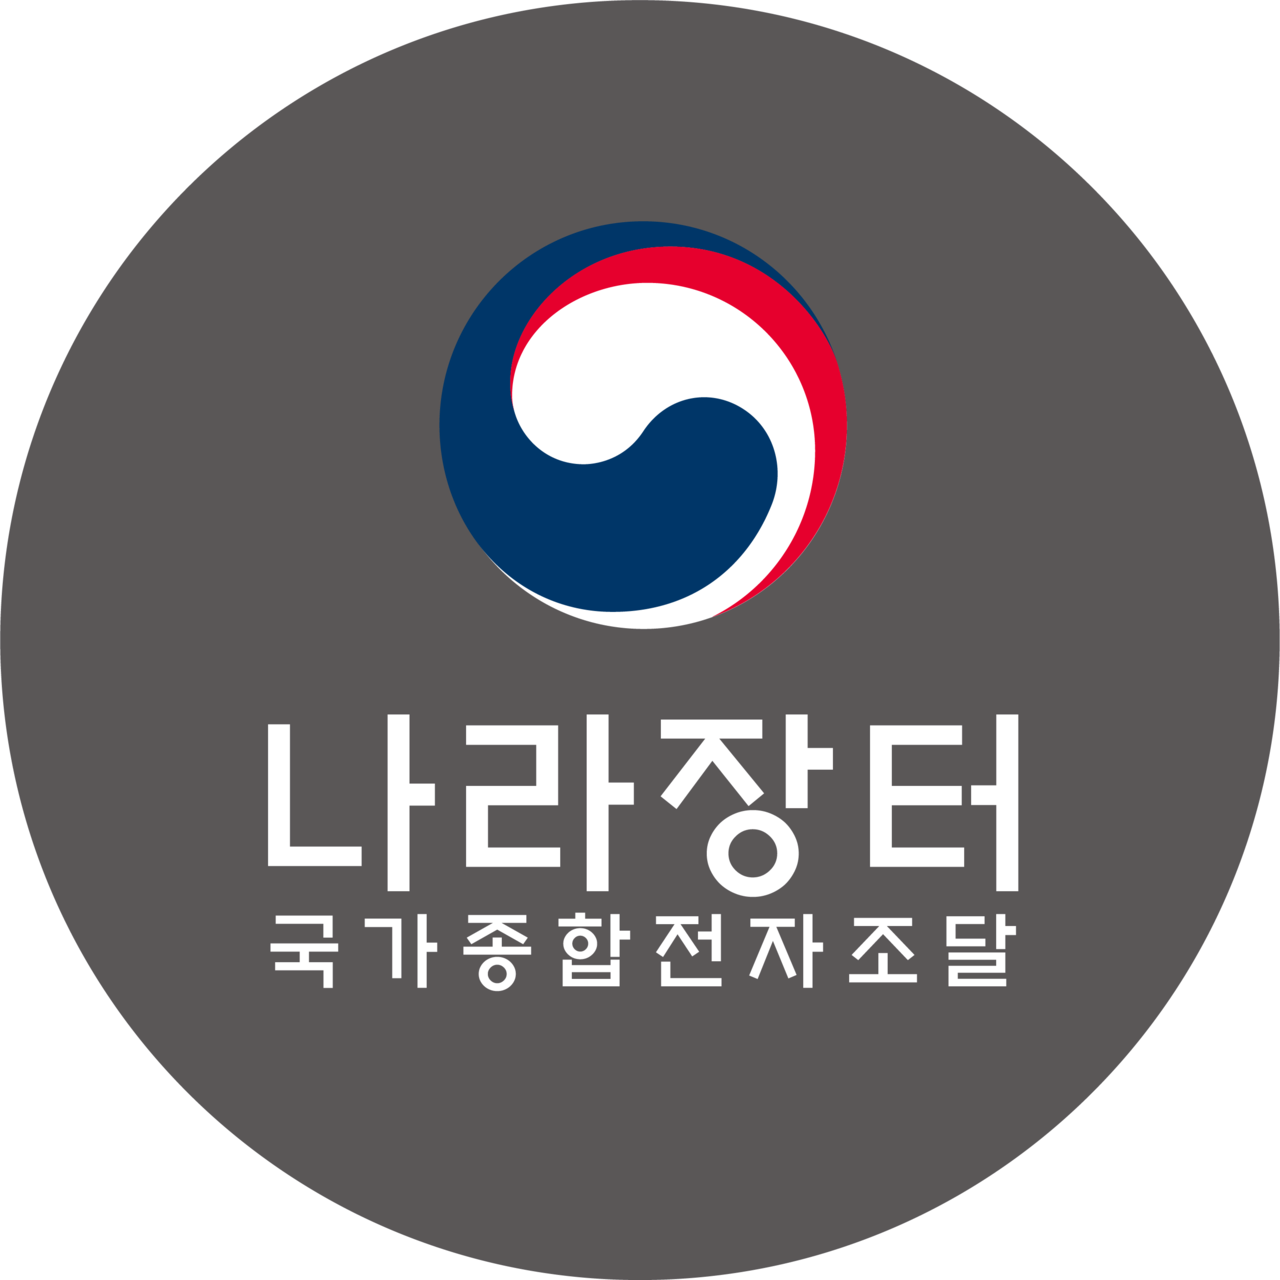 <p style="text-align: center;"><span style="font-size: 24px;"><strong><span style="color: rgb(255, 255, 255);">다수공급자물품</span></strong></span></p>